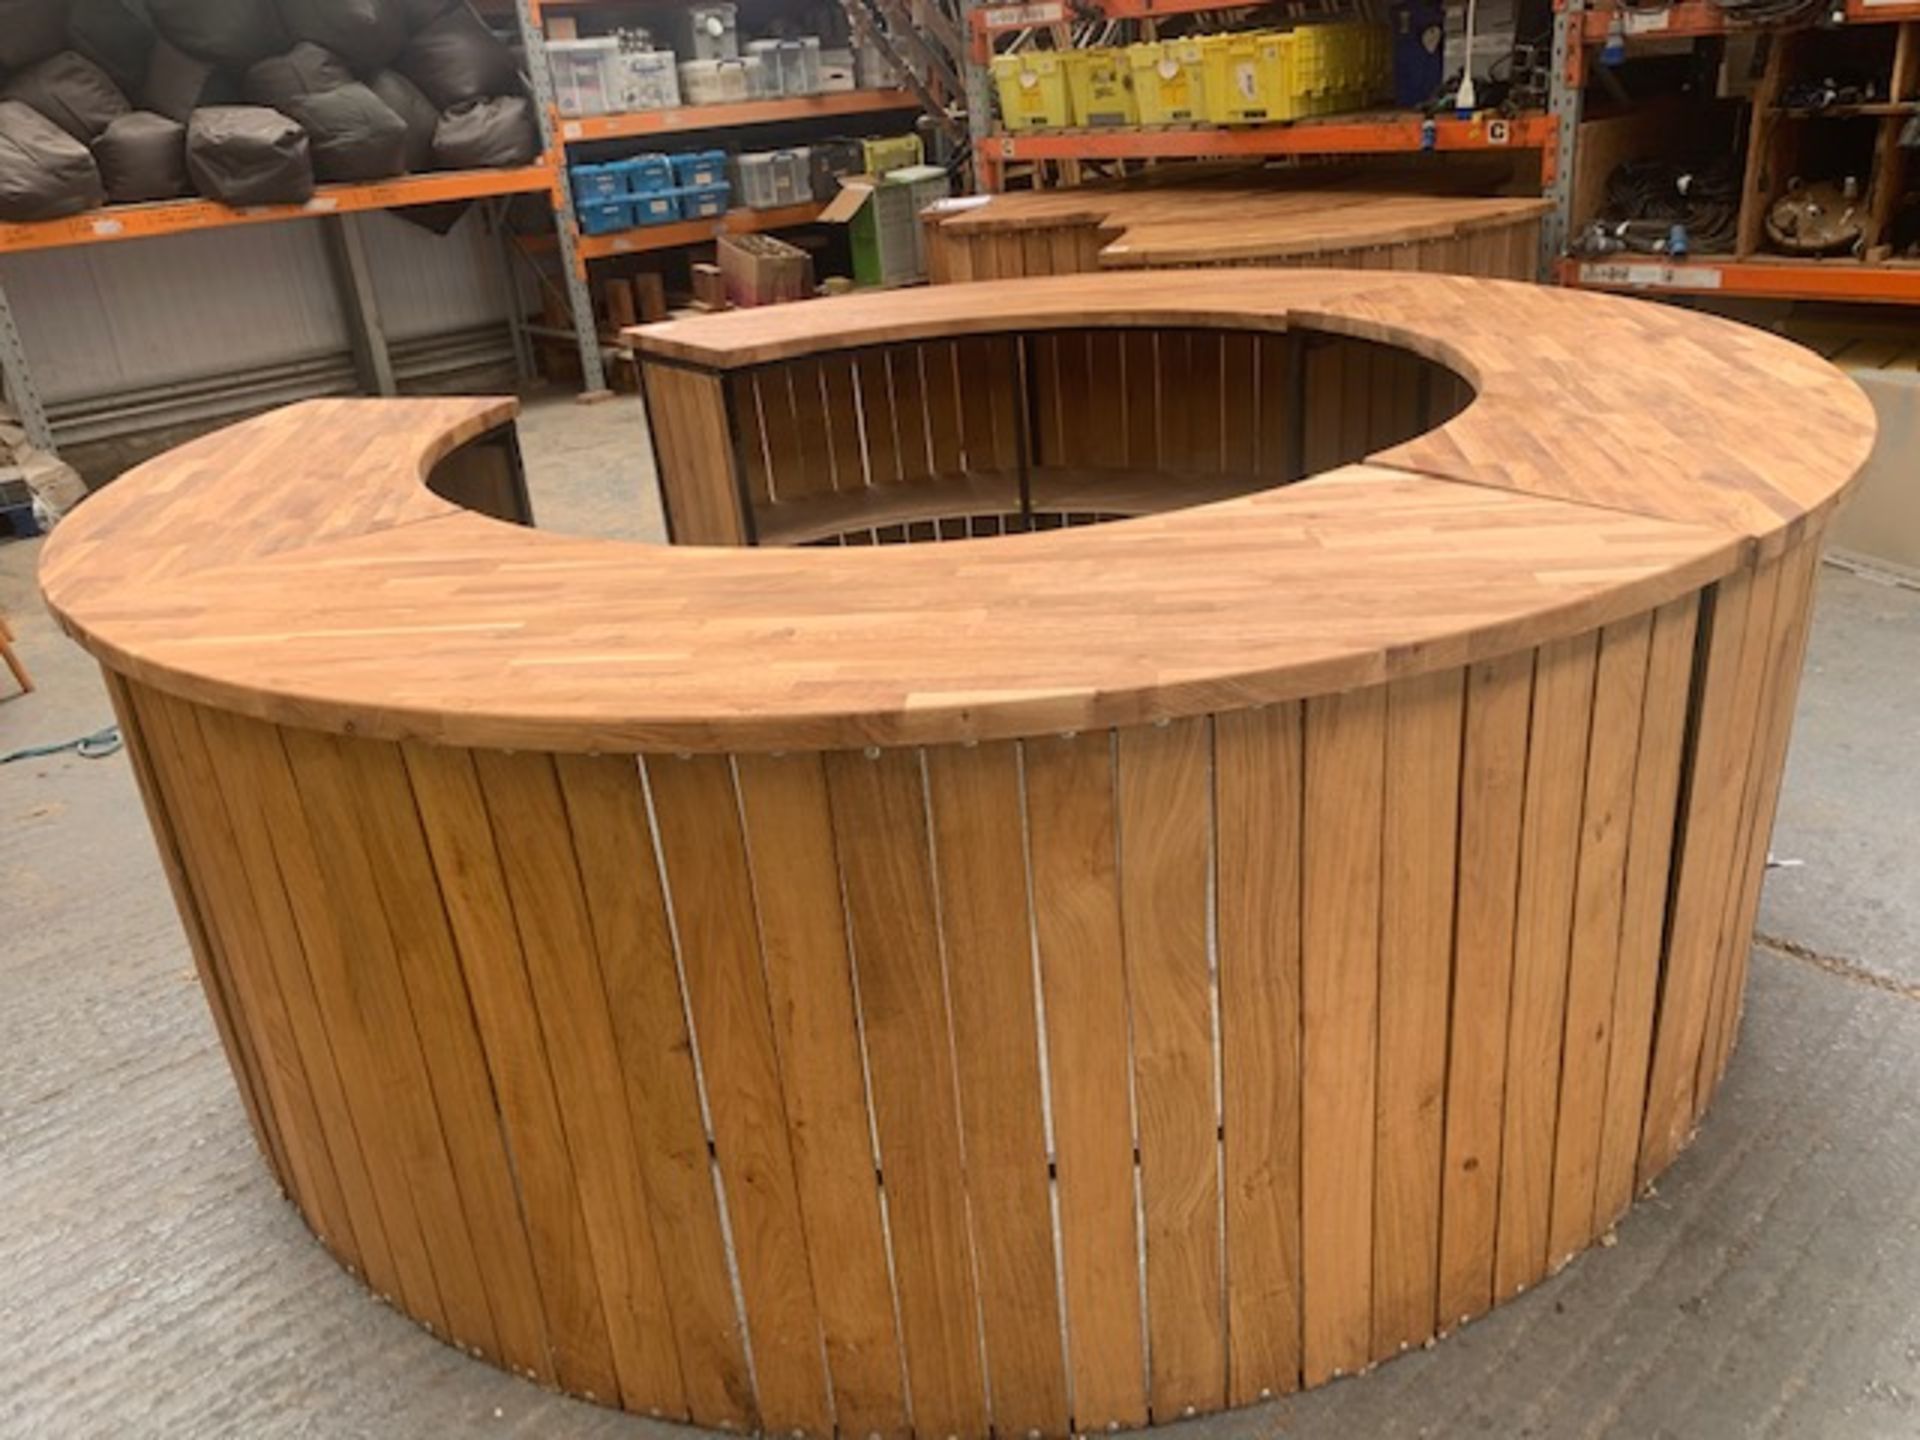 Circular 4 section oak top events bar L 3100mm W 3100mm H 1050mm - Image 3 of 7